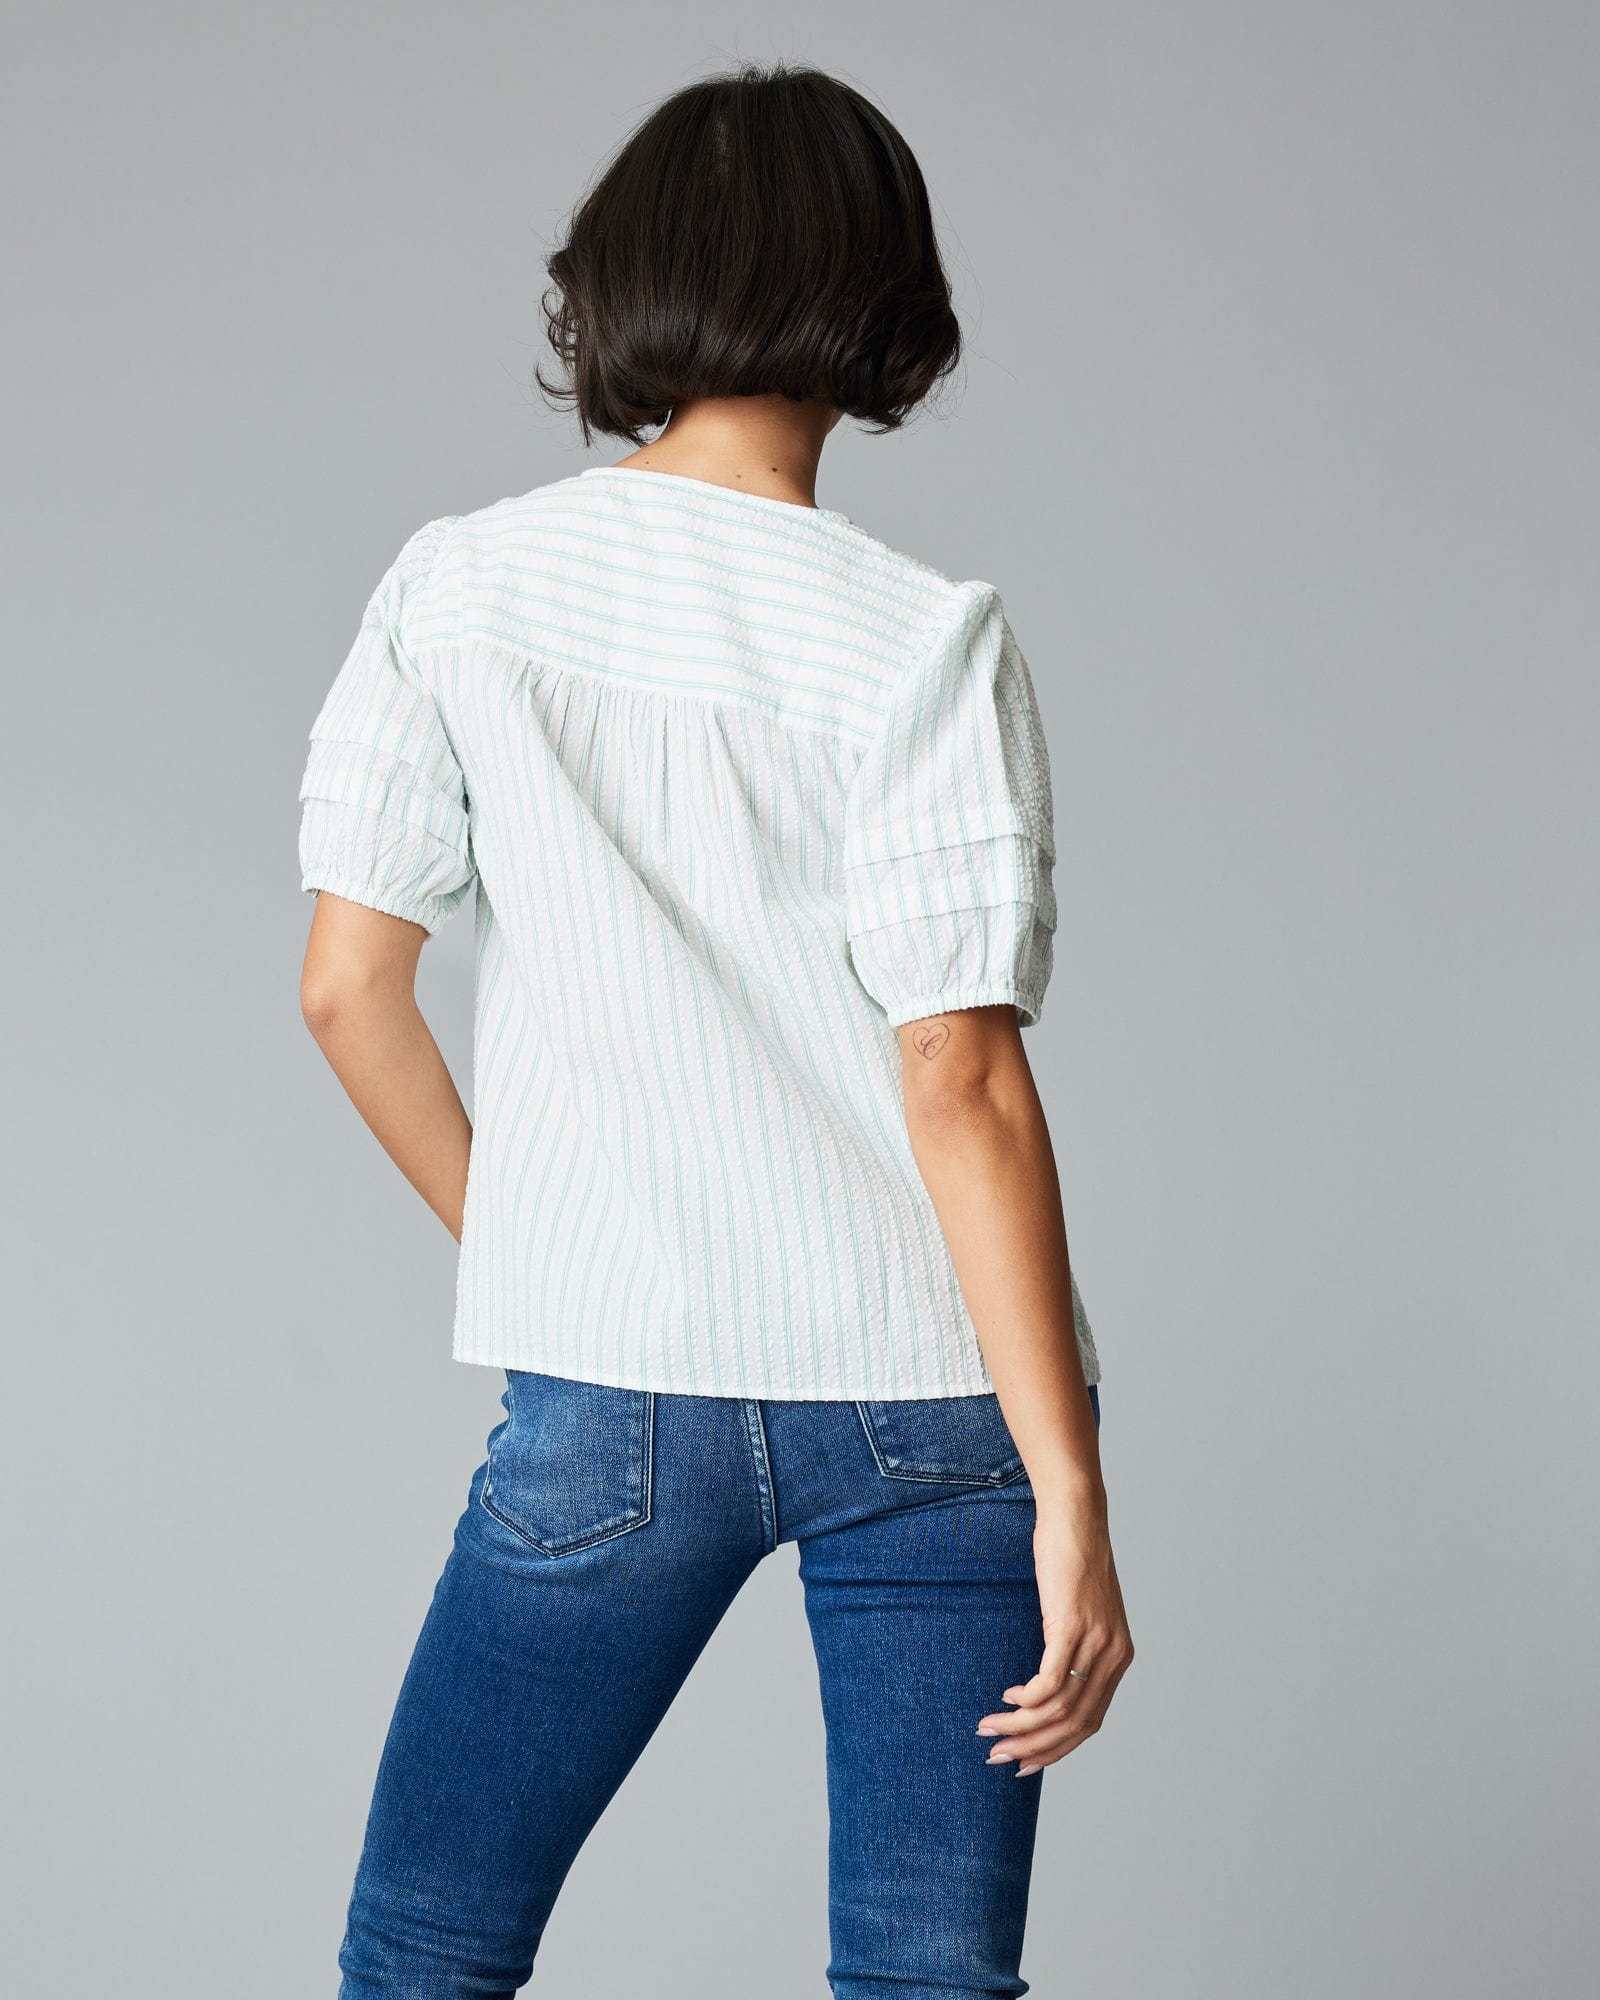 Woman in a short sleeve, v-neck, white and green vertical striped blouse.